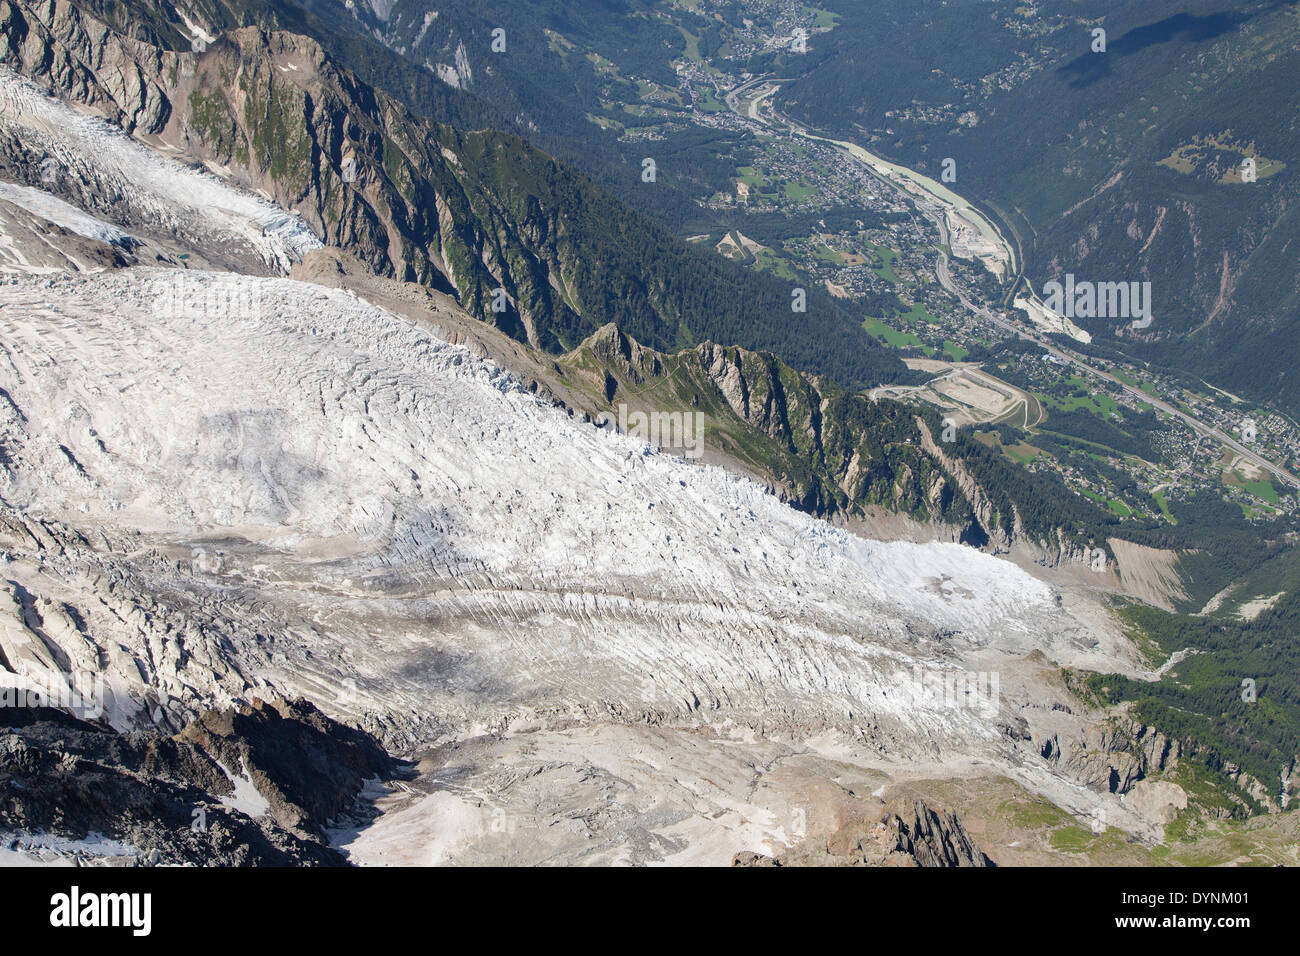 Bossons Glacier from the summit of the Aiguille du Midi in the Mont Blanc massif. Stock Photo